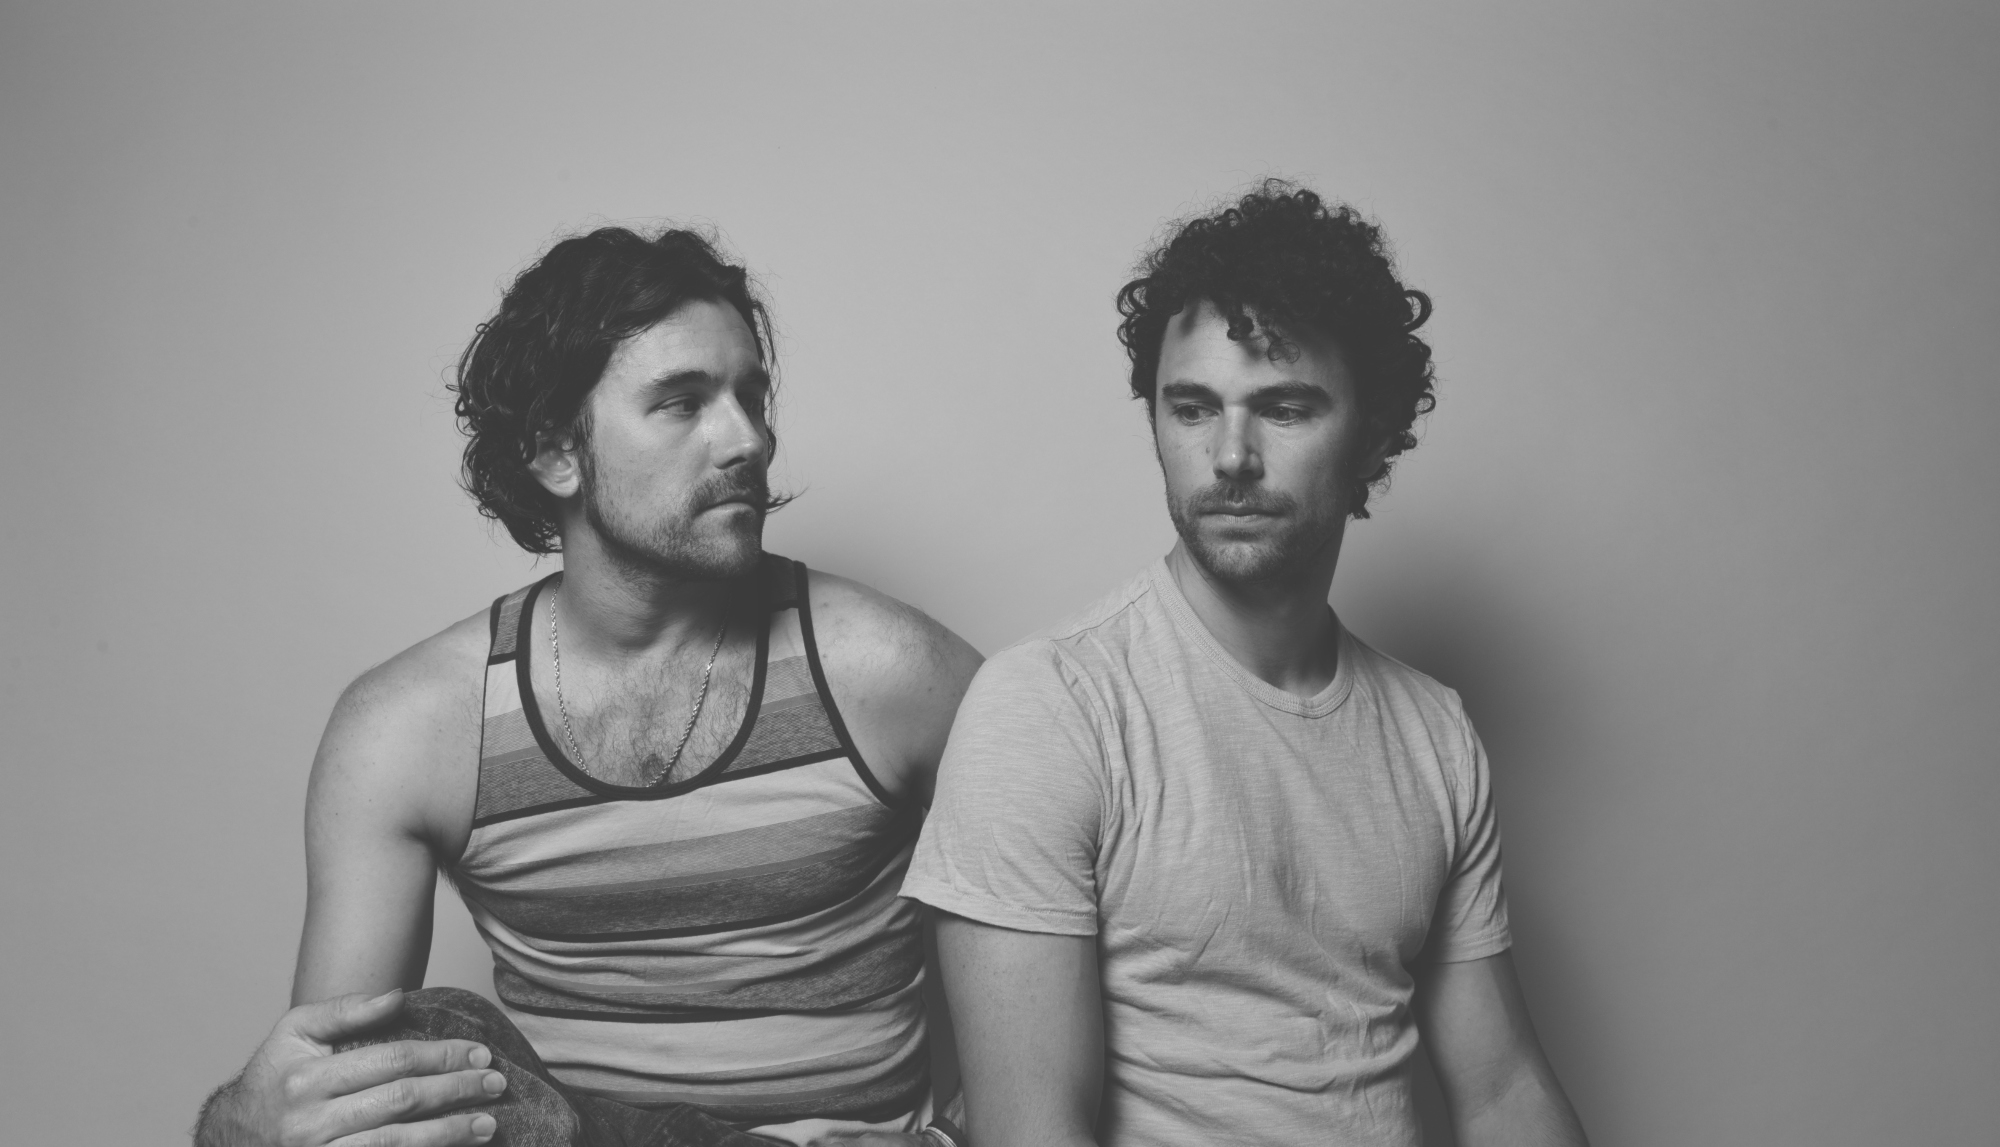 Tall Heights and Ryan Montbleau Cover Crosby, Stills & Nash’s “Helplessly Hoping”